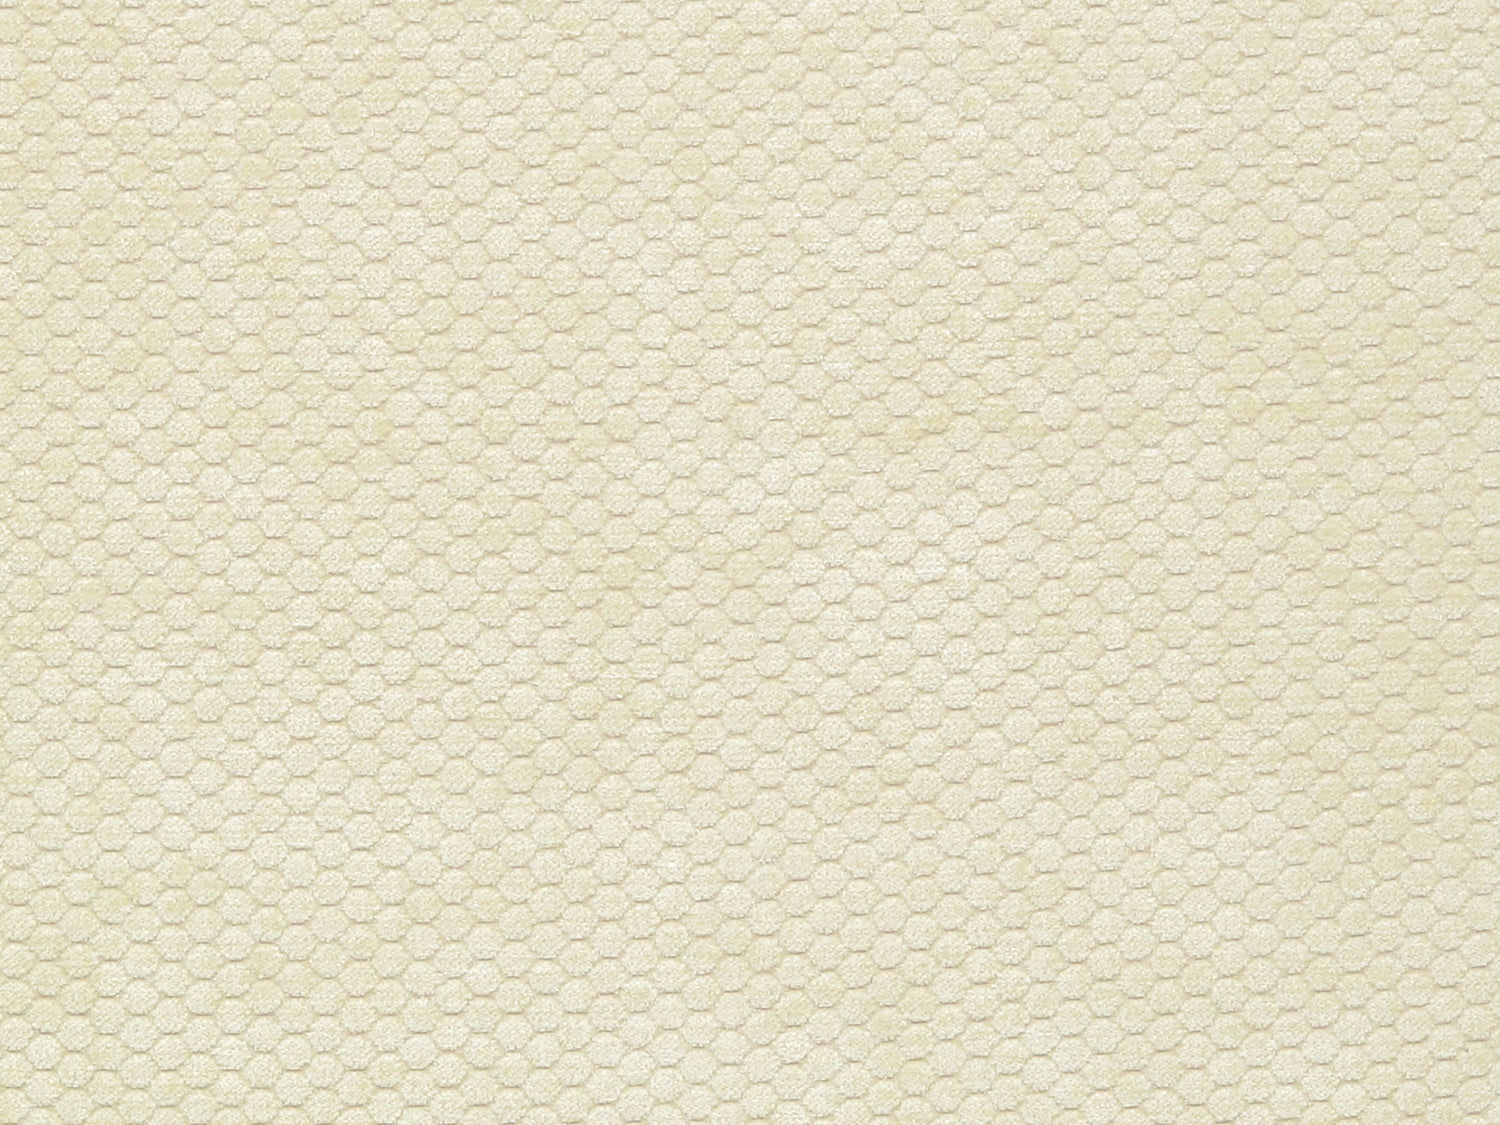 Monterosso fabric in cream color - pattern number FO 0005ZIP1 - by Scalamandre in the Old World Weavers collection